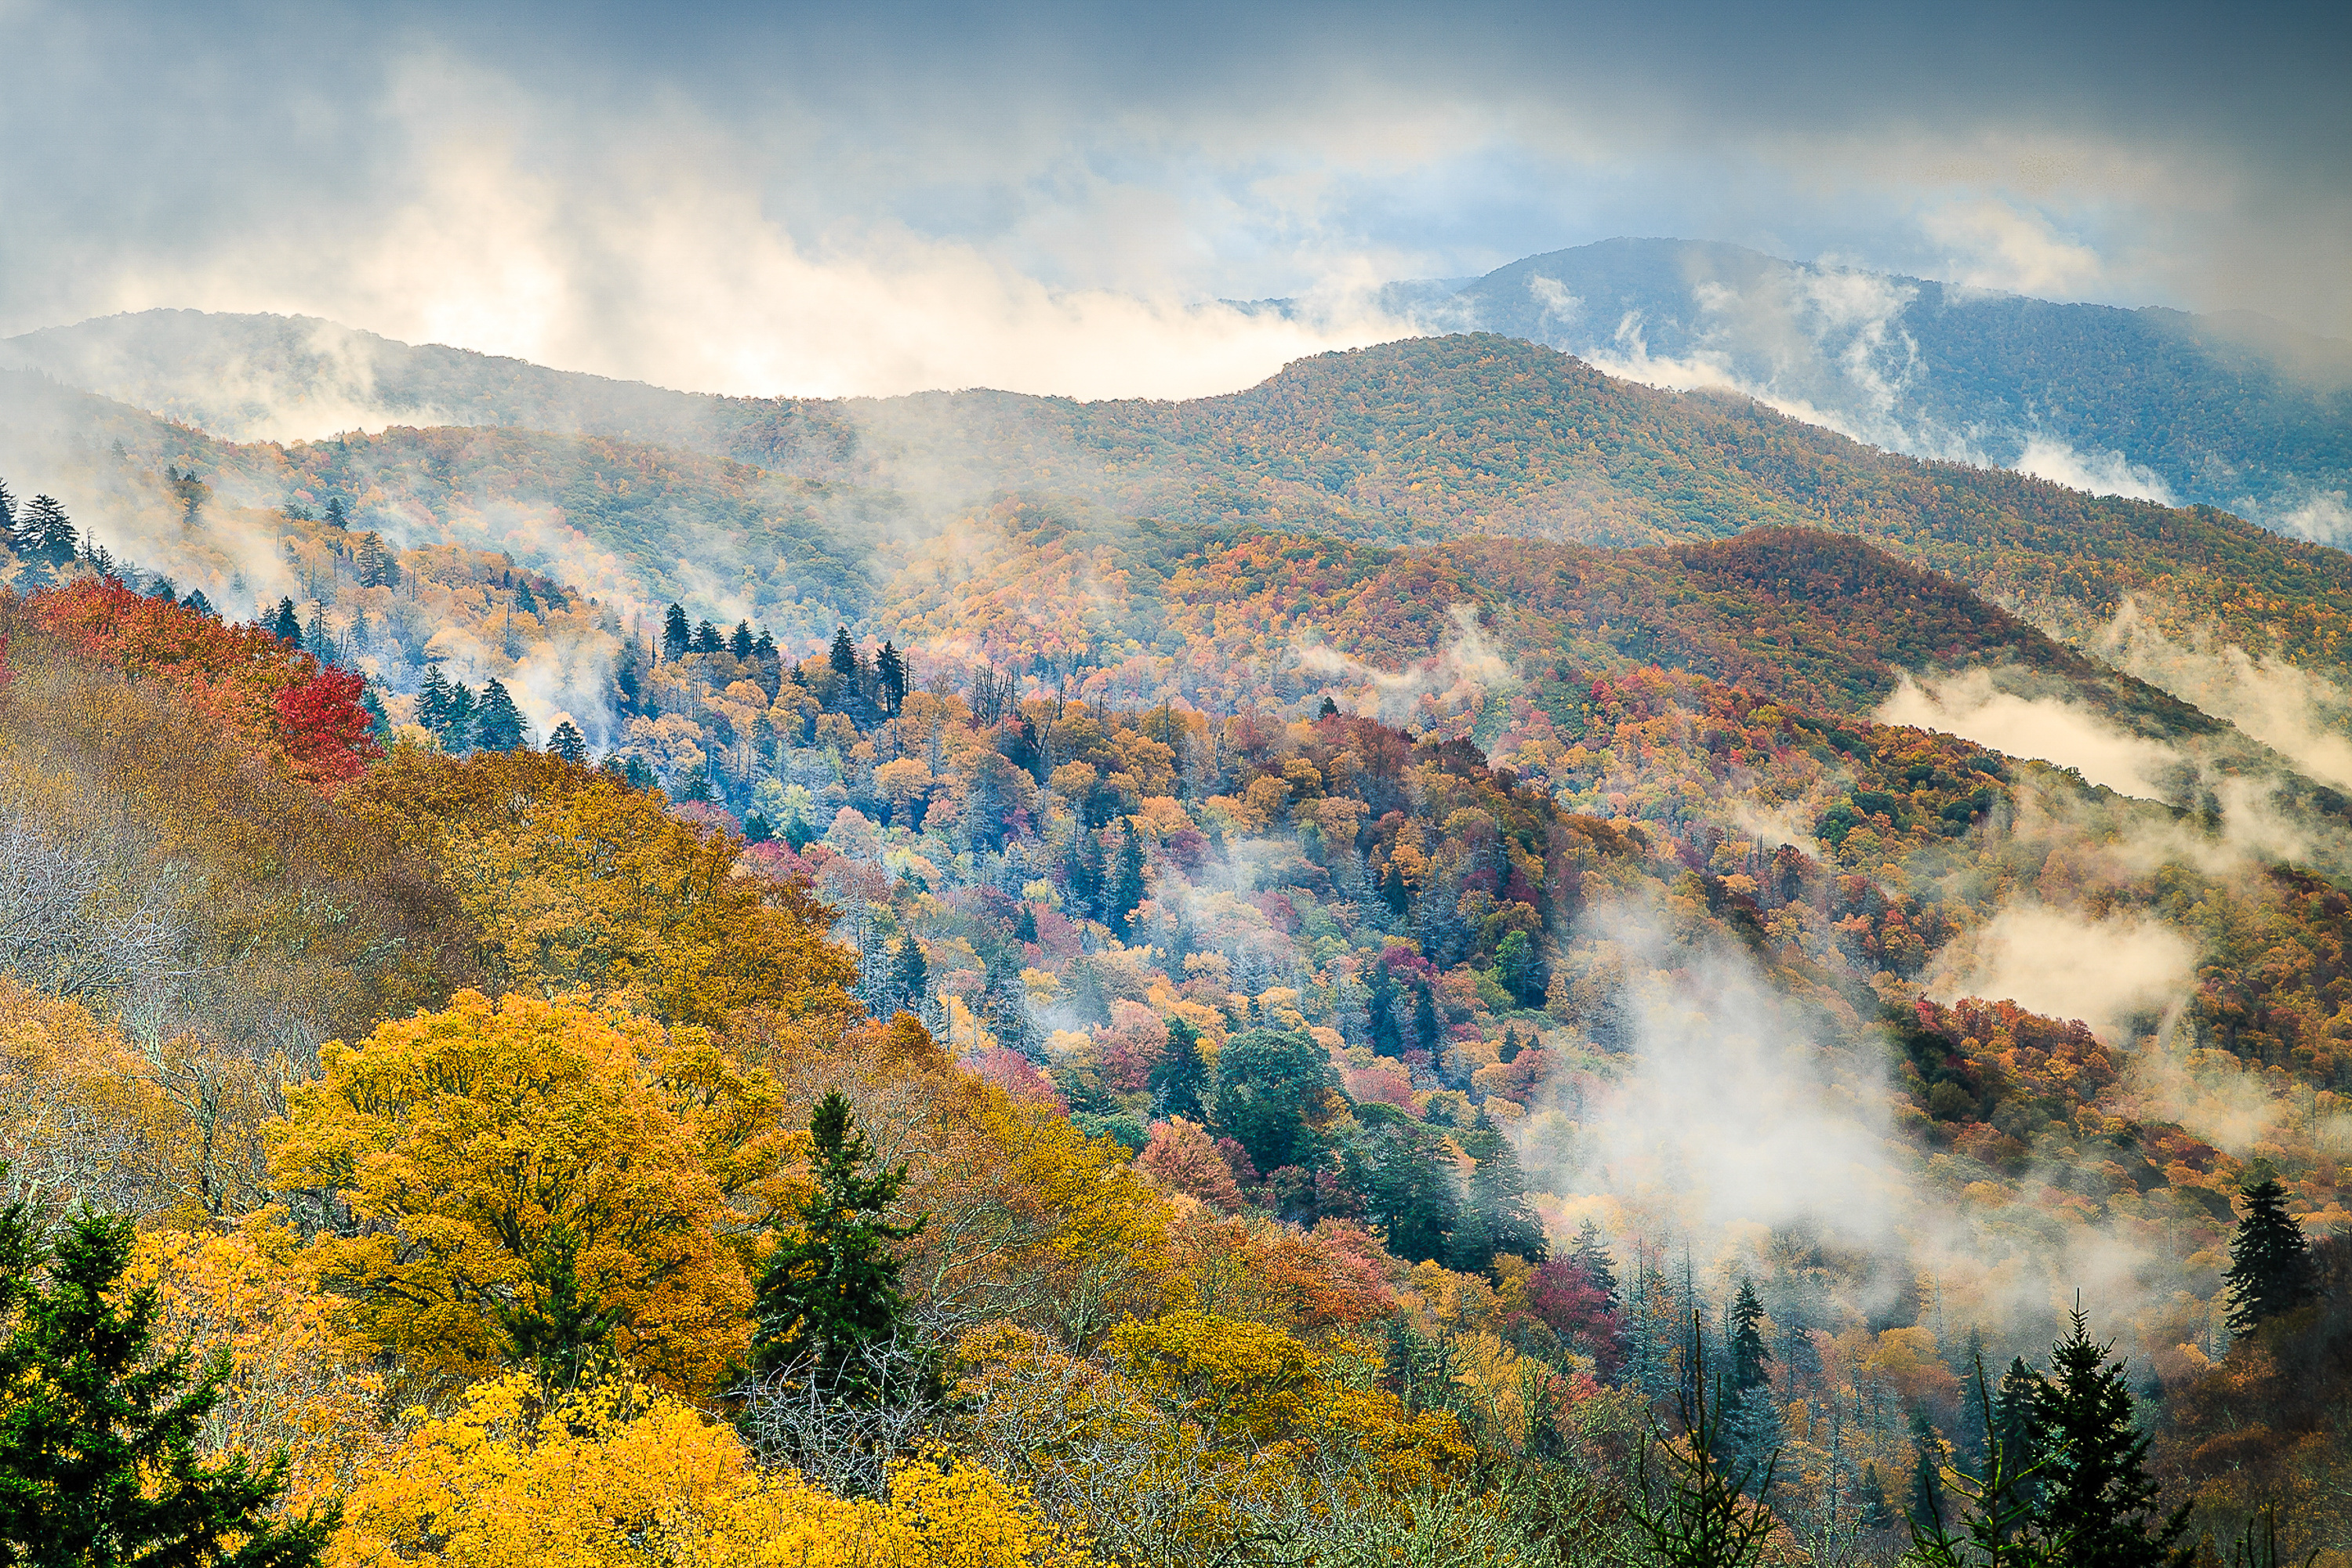 The Newfound Gap in the Smoky Mountains National Park - National Parks to Visit in Spring